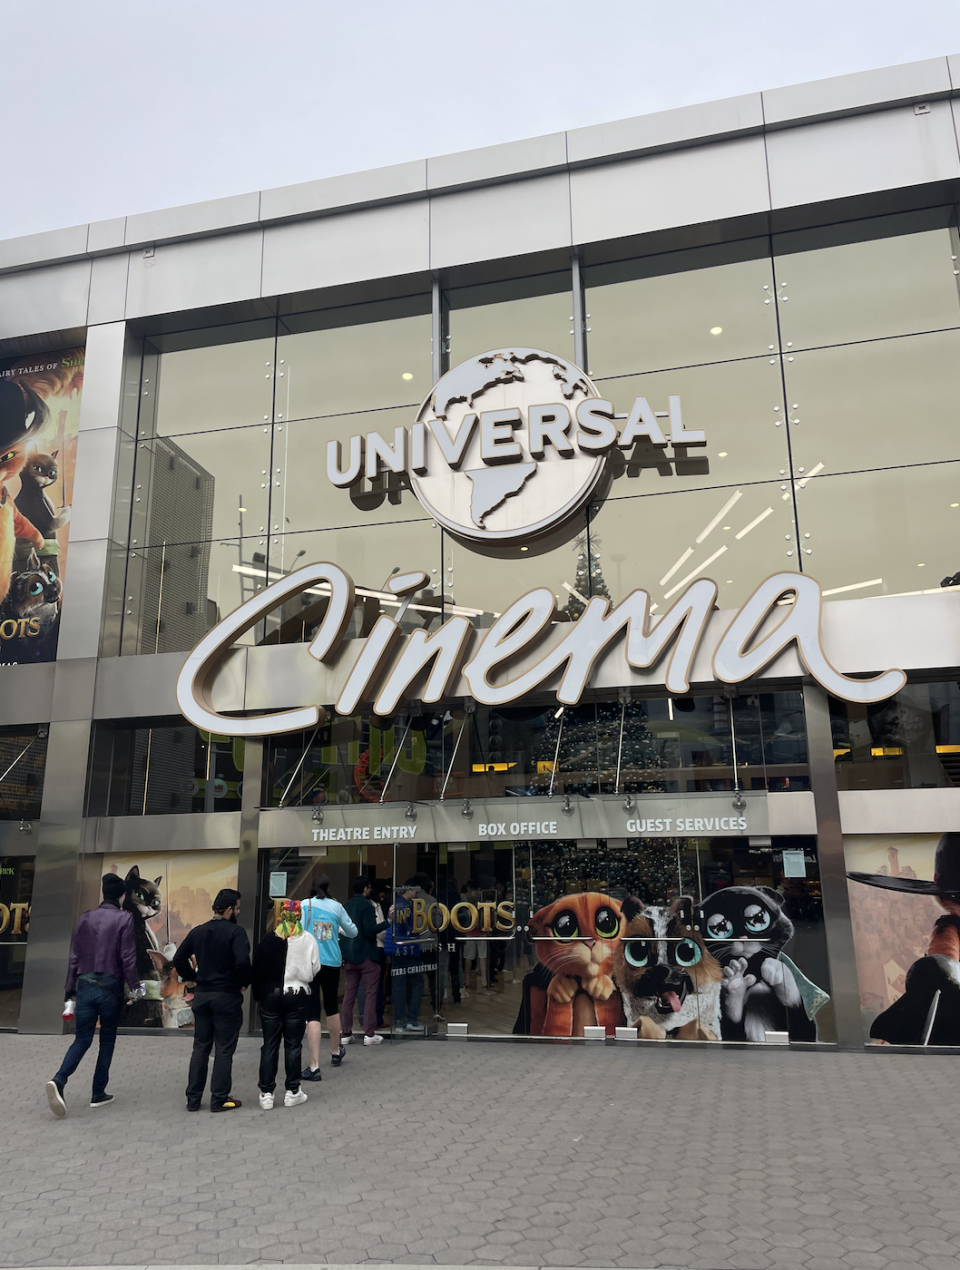 The AMC theater at Universal CityWalk in Hollywood, California.